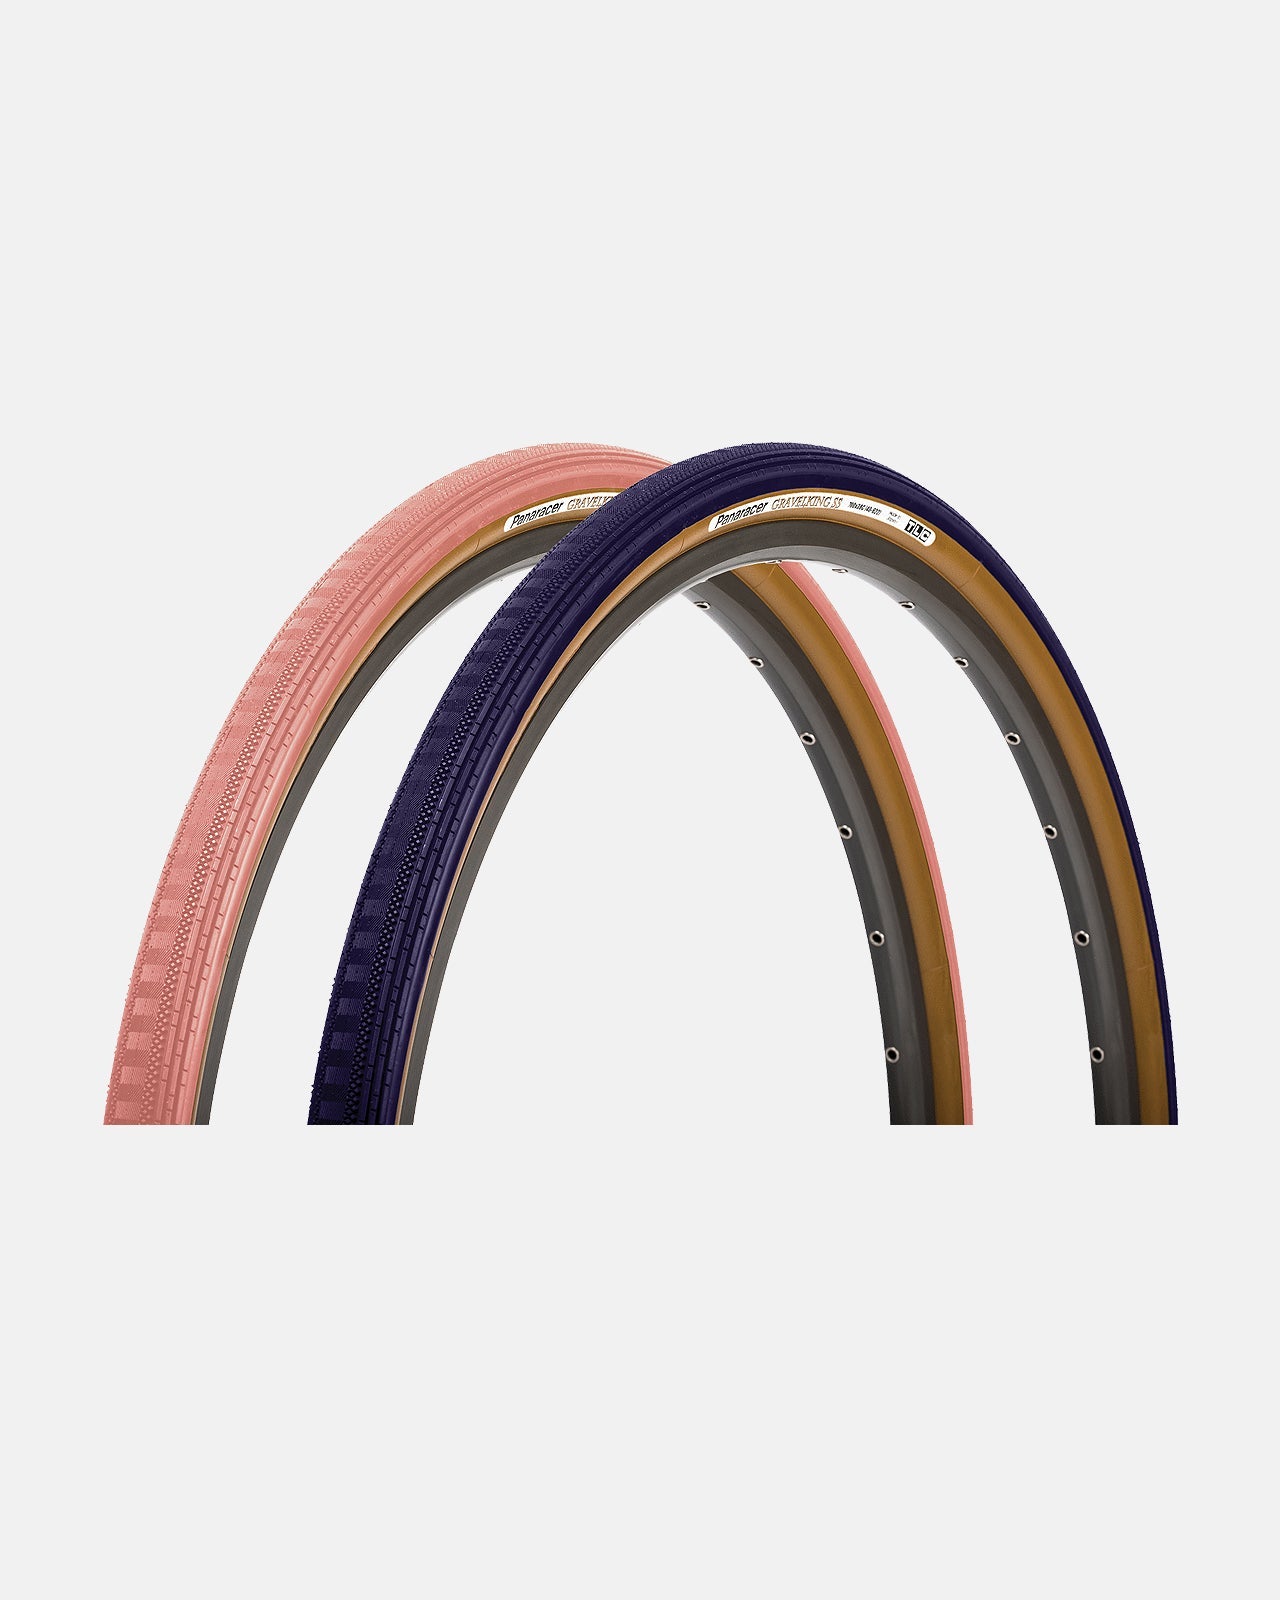 Panaracer Gravelking SS Tire - Purple and Pink